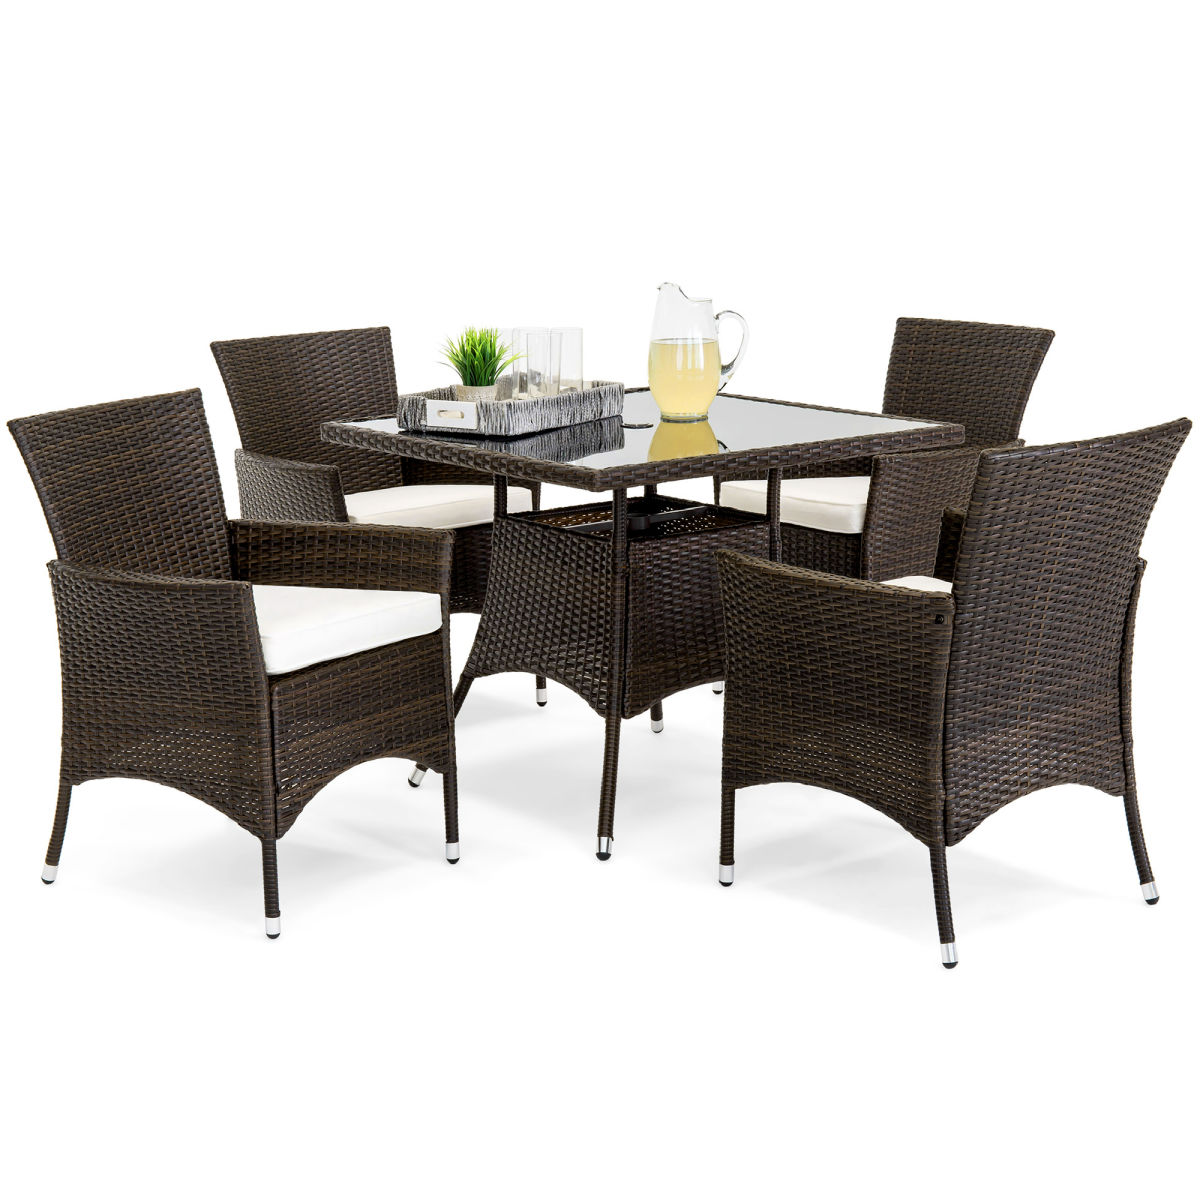 Best Choice Product 5-Piece Outdoor Wicker Patio Dining Set